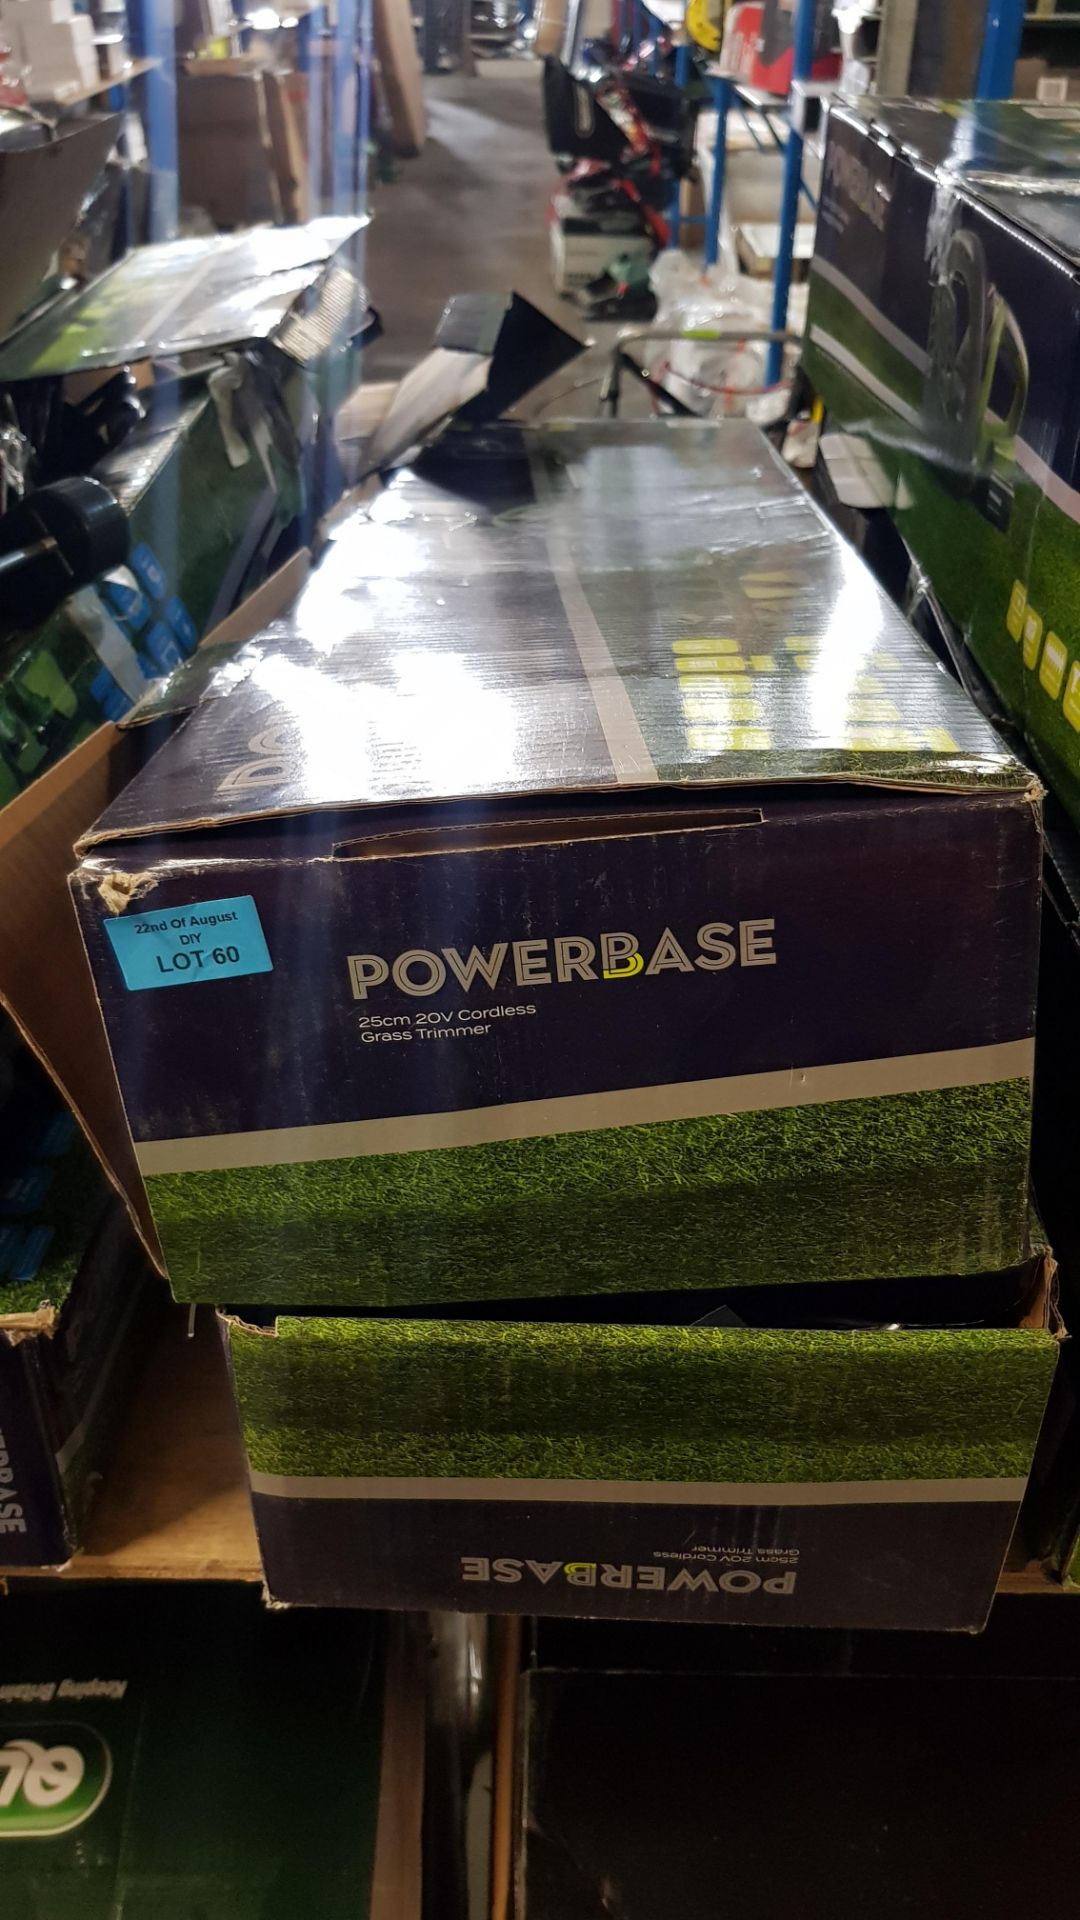 (R11J) 2x Powerbase 25cm 20V Cordless Grass Trimmer (Both With Battery & Charger). RRP £59 Each. - Image 3 of 3